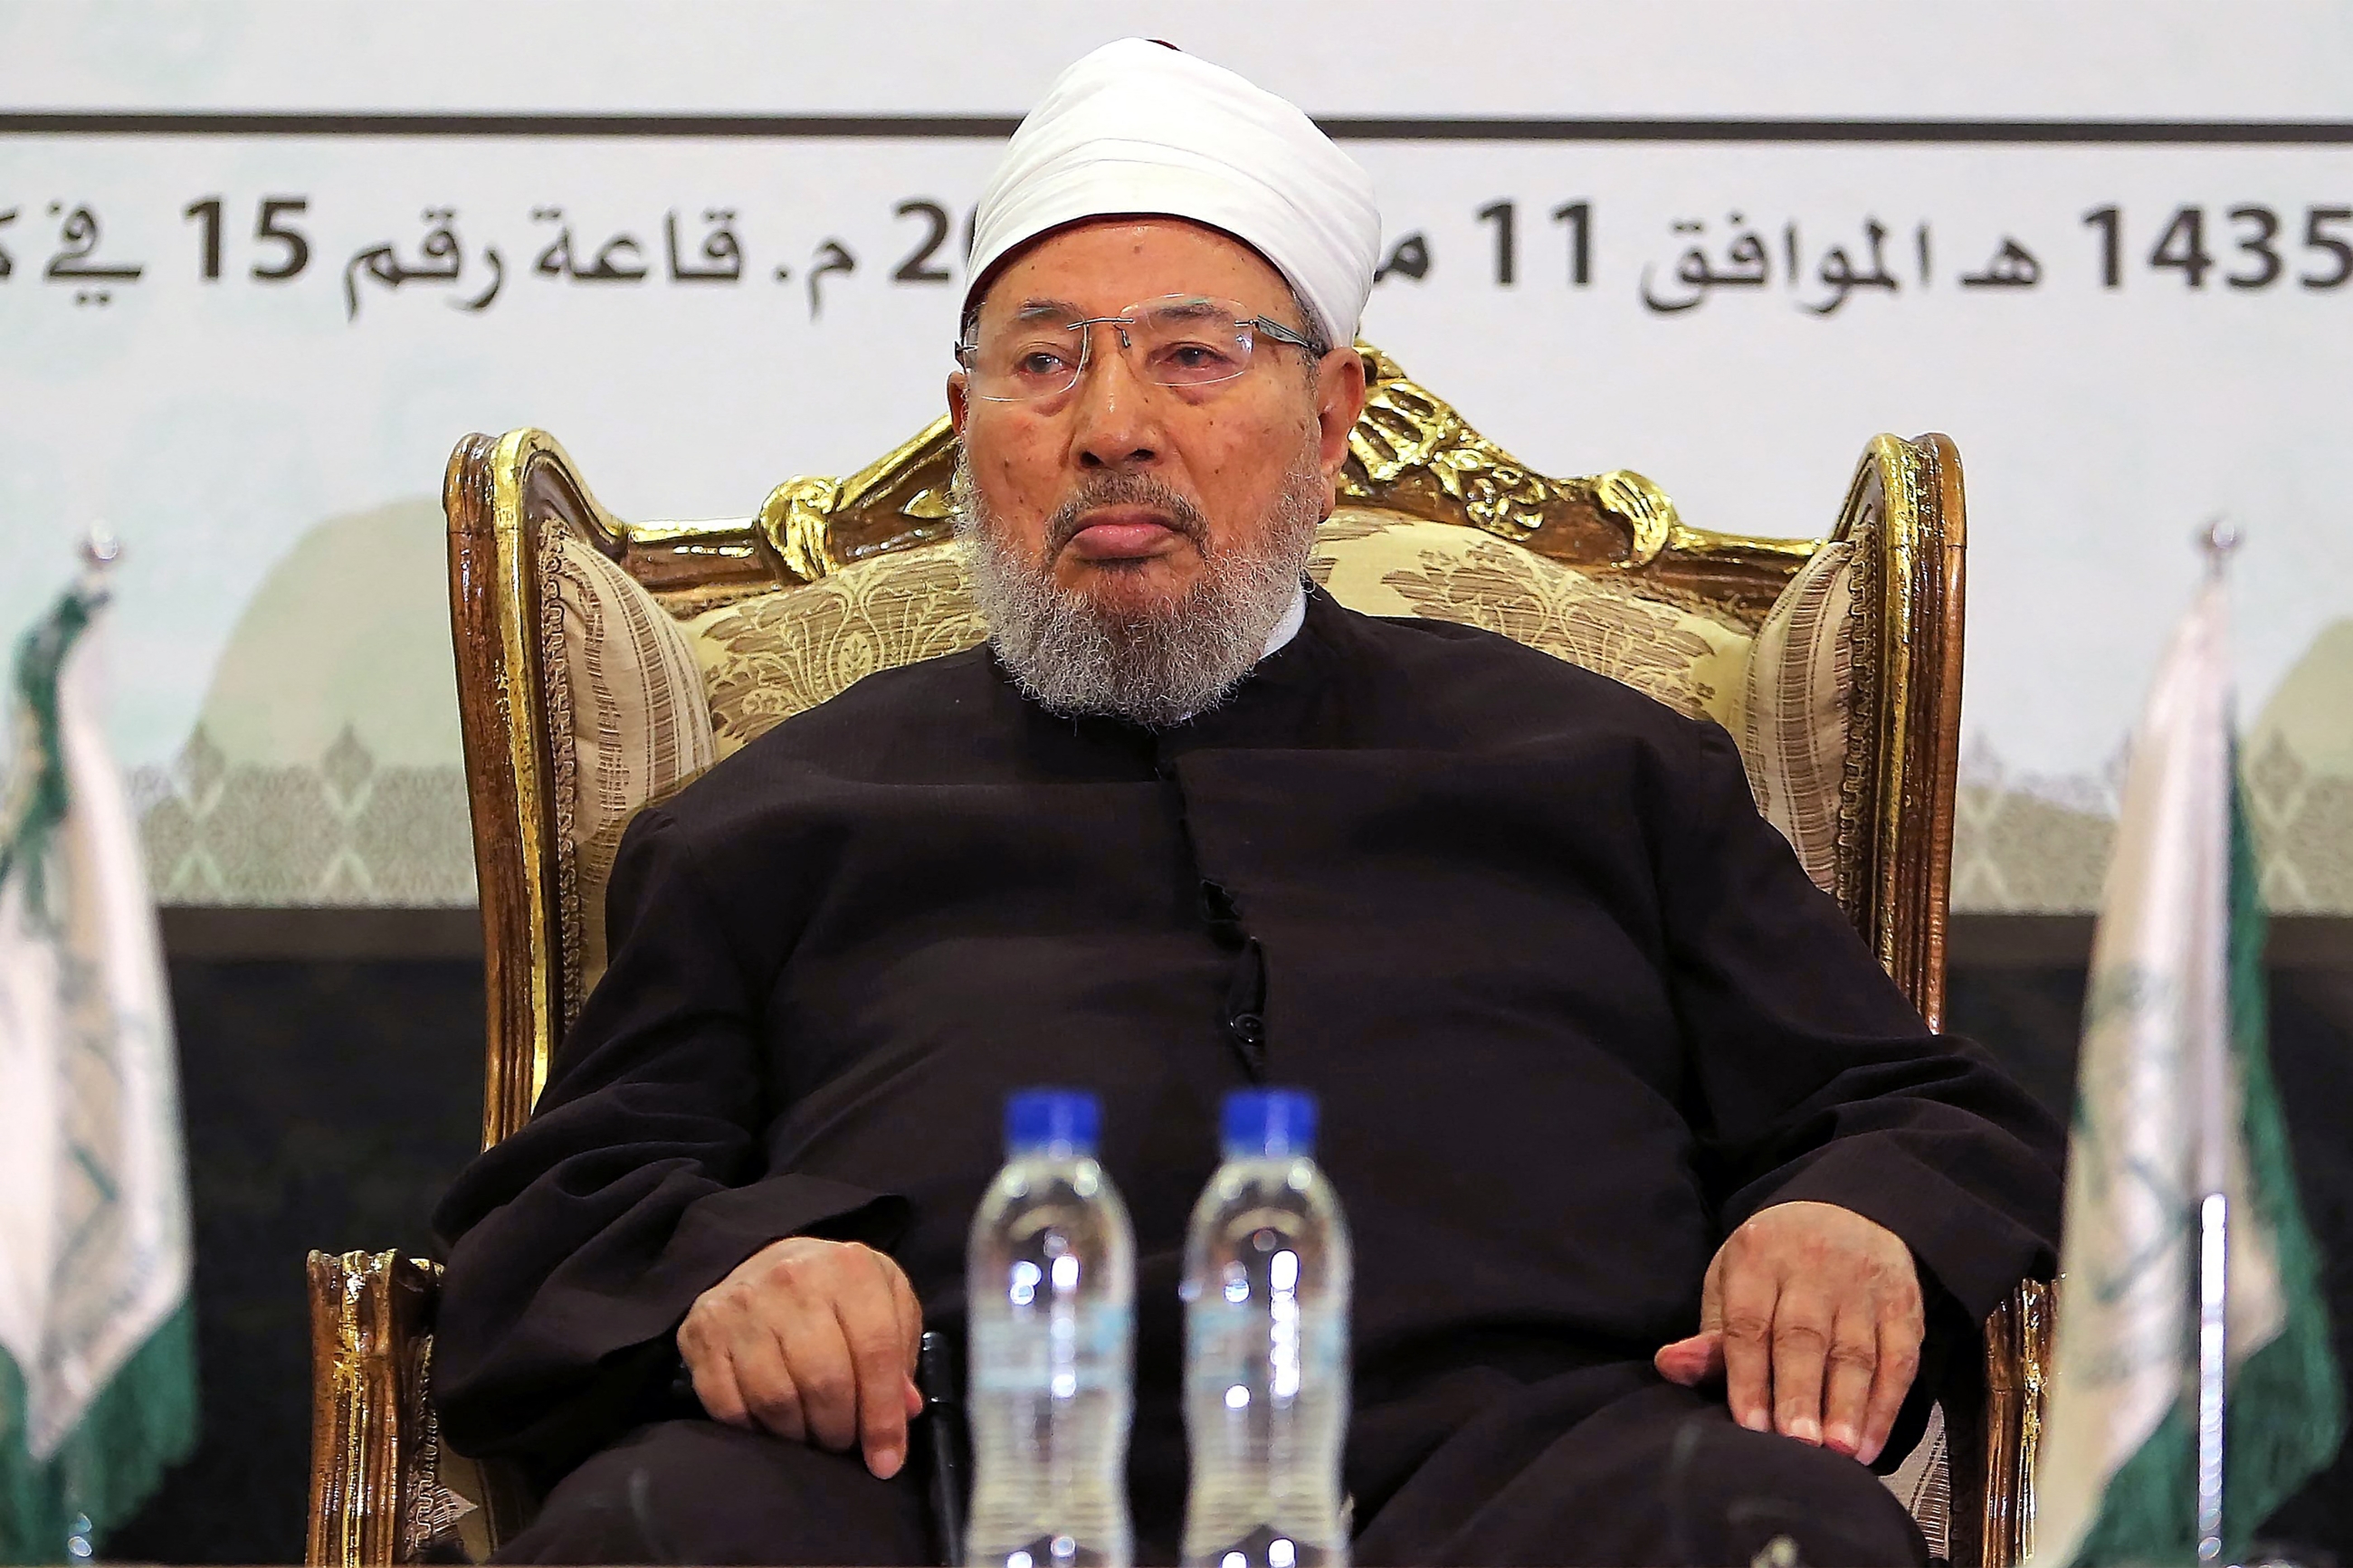 In this file photo, late Egyptian cleric and chairman of the International Union of Muslim Scholars Sheikh Yusuf al-Qaradawi attends a seminar in Doha, Qatar on 11 May 2014 (AFP)